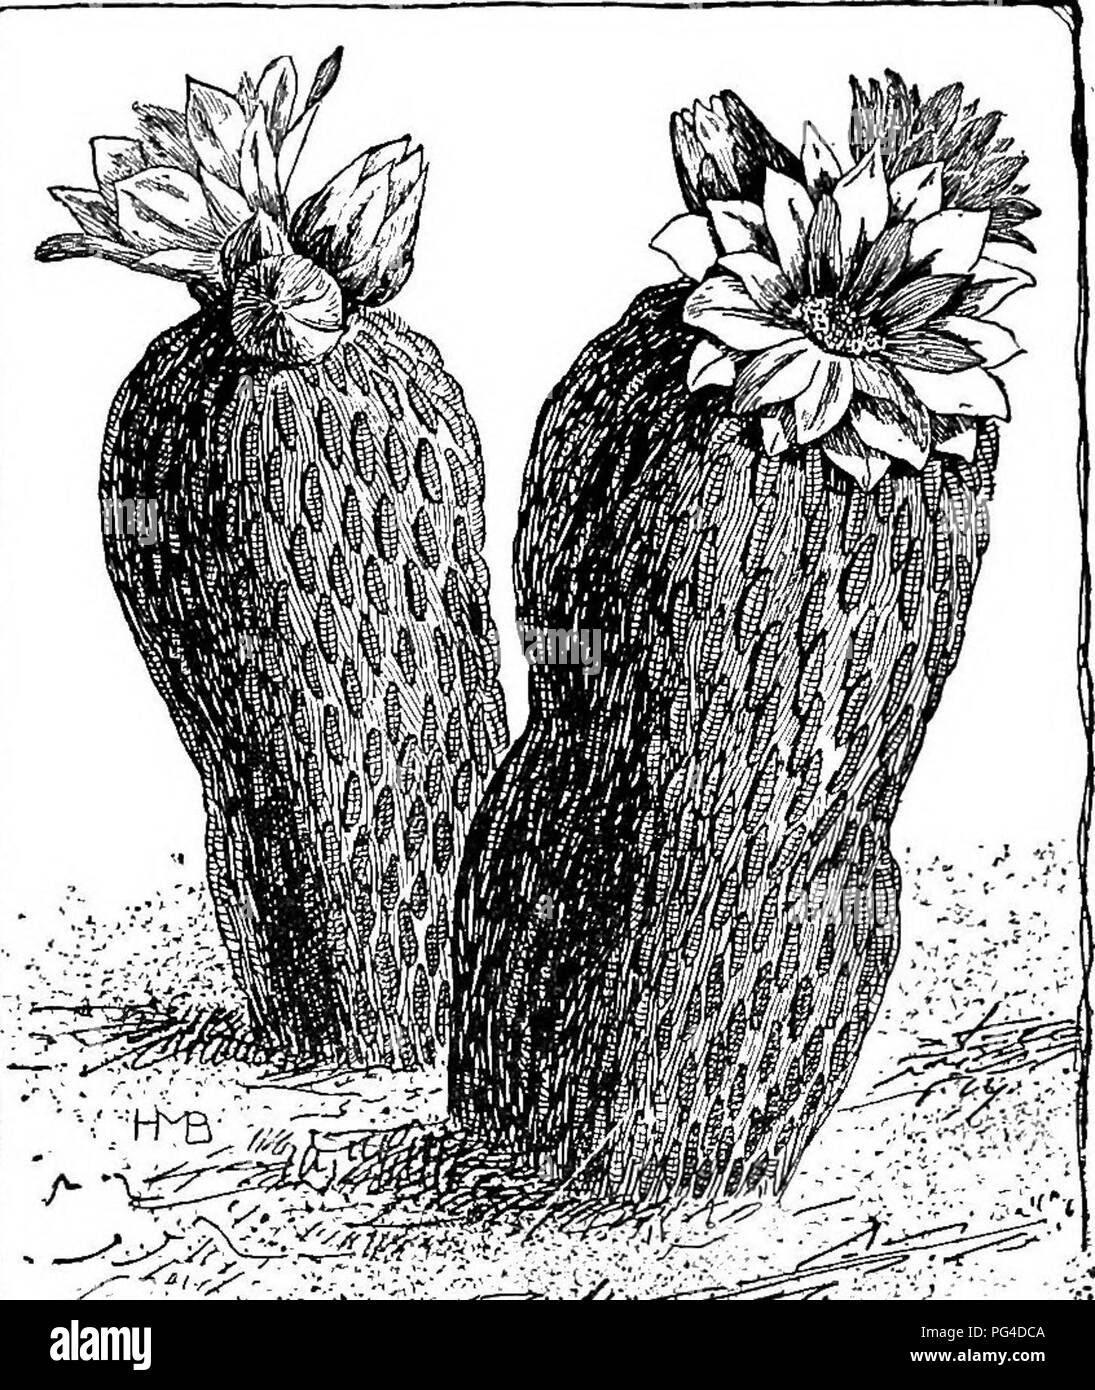 . Cyclopedia of American horticulture, comprising suggestions for cultivation of horticultural plants, descriptions of the species of fruits, vegetables, flowers, and ornamental plants sold in the United States and Canada, together with geographical and biographical sketches. Gardening. 302. Showine the remarkable condensation of the plant body in a cactus—Mamillaria micromeris. CACALI6PSIS (Cacaiia-Hfce). Comp6sitm. One spe- cies, with discoid, very many-ild. heads of perfect yel- low florets, and palmate Ivs. Narddsmia, Gray. Strong perennial, 1-2 ft. high, loose, woolly, but becoming nearly Stock Photo